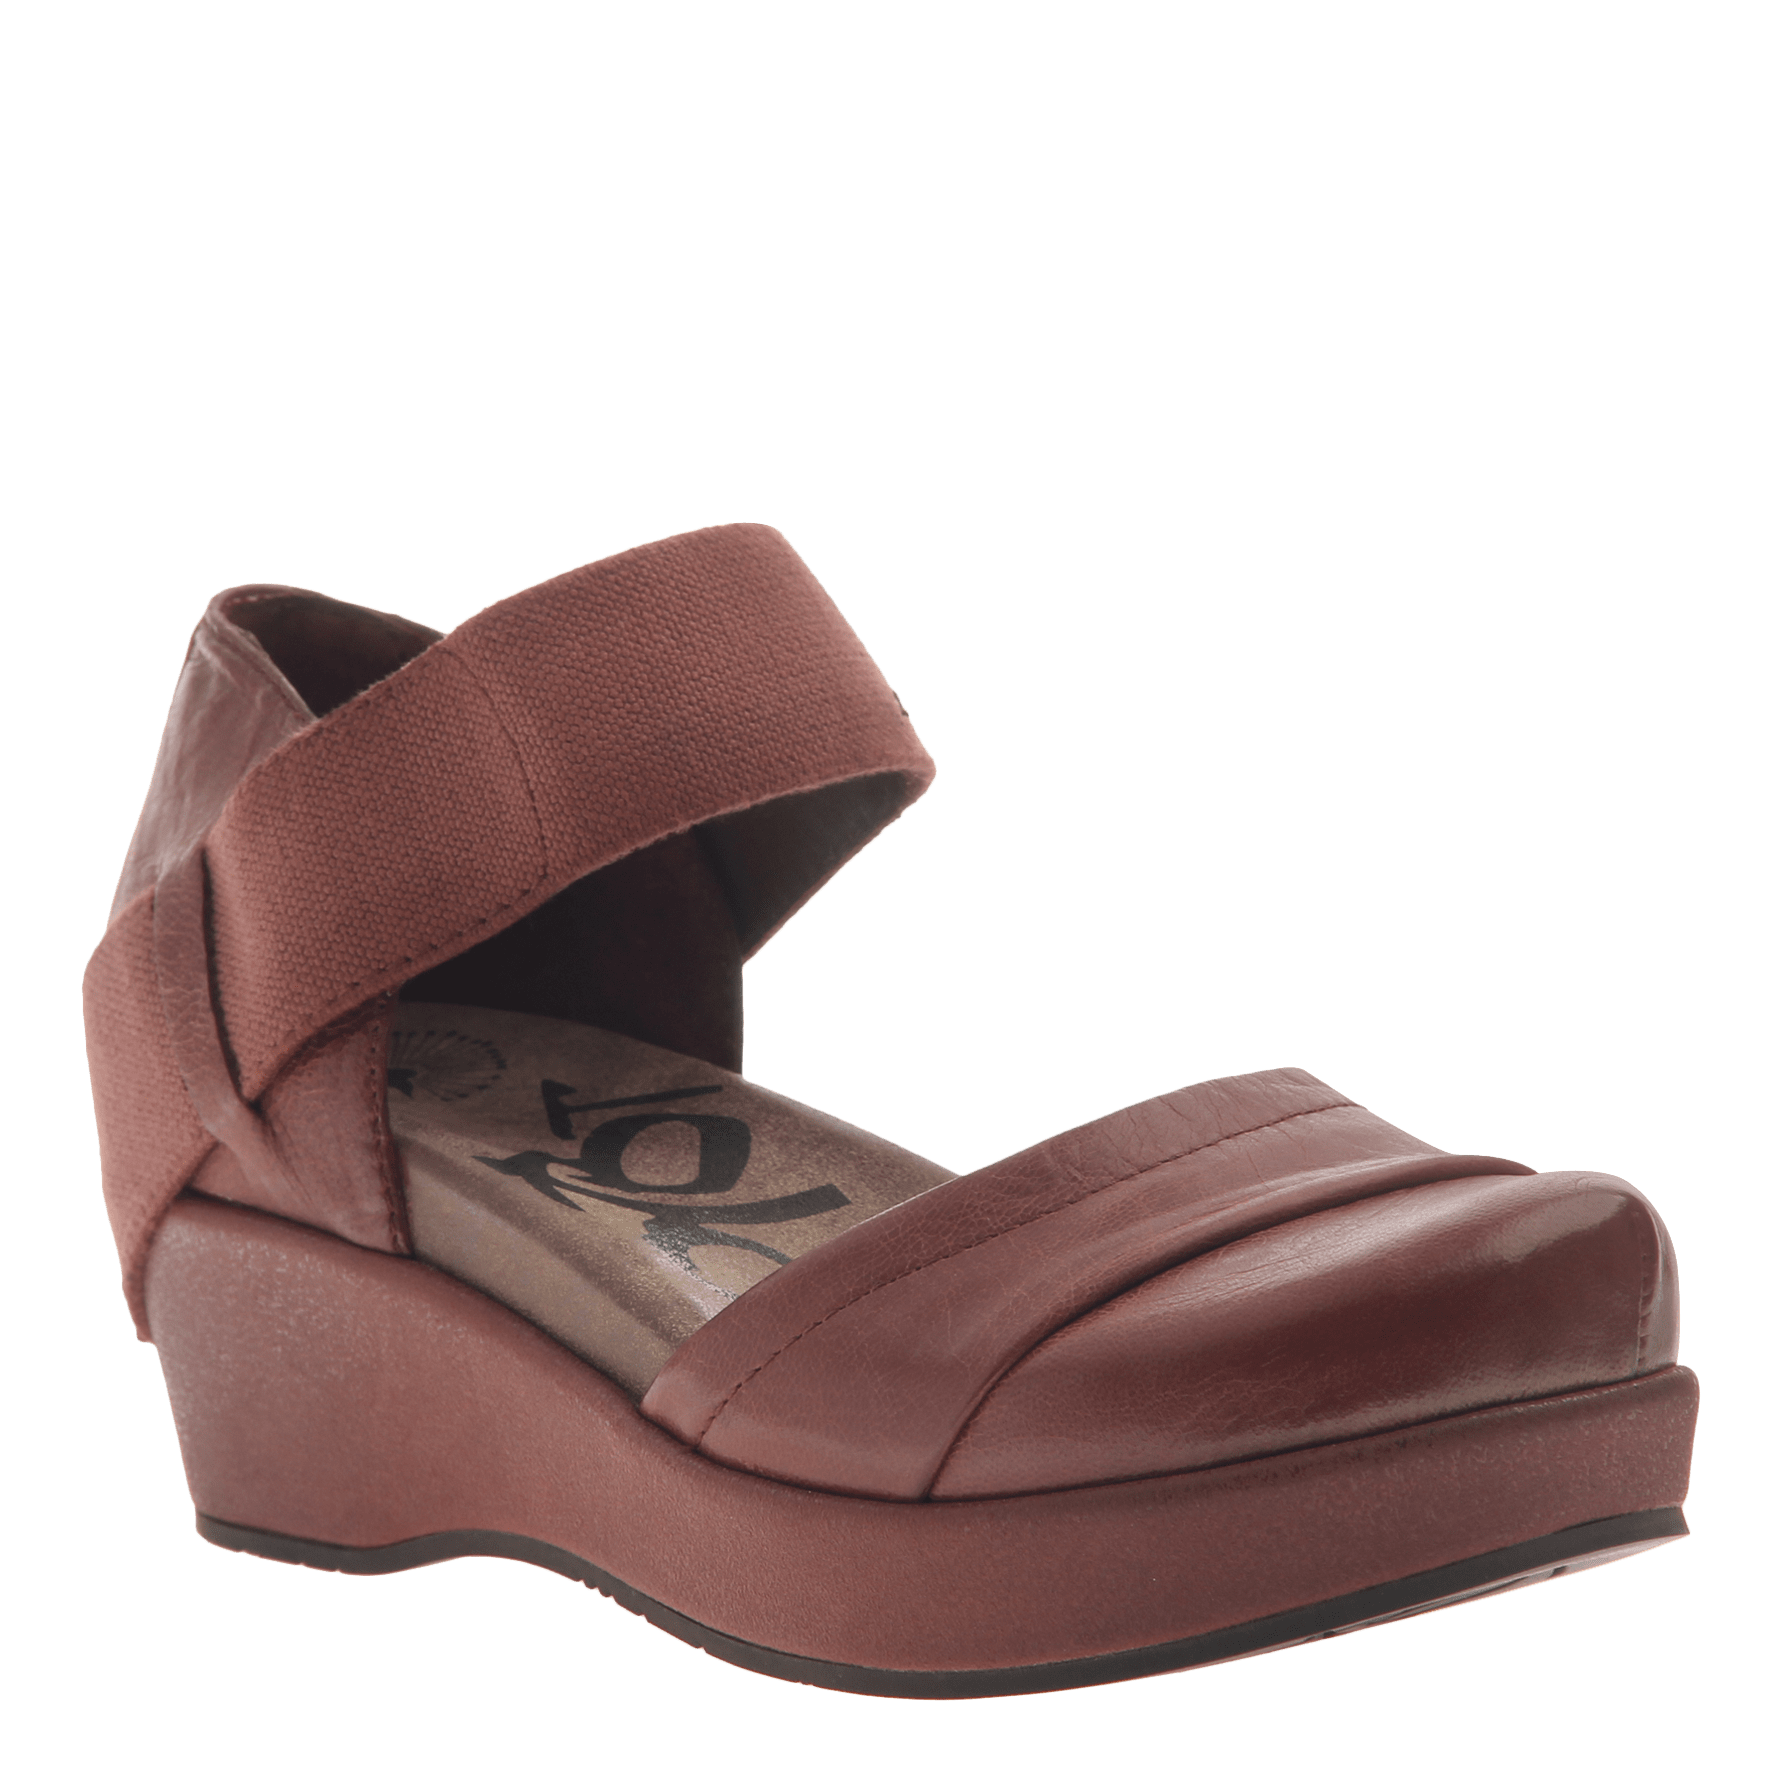 comfortable closed toe wedges